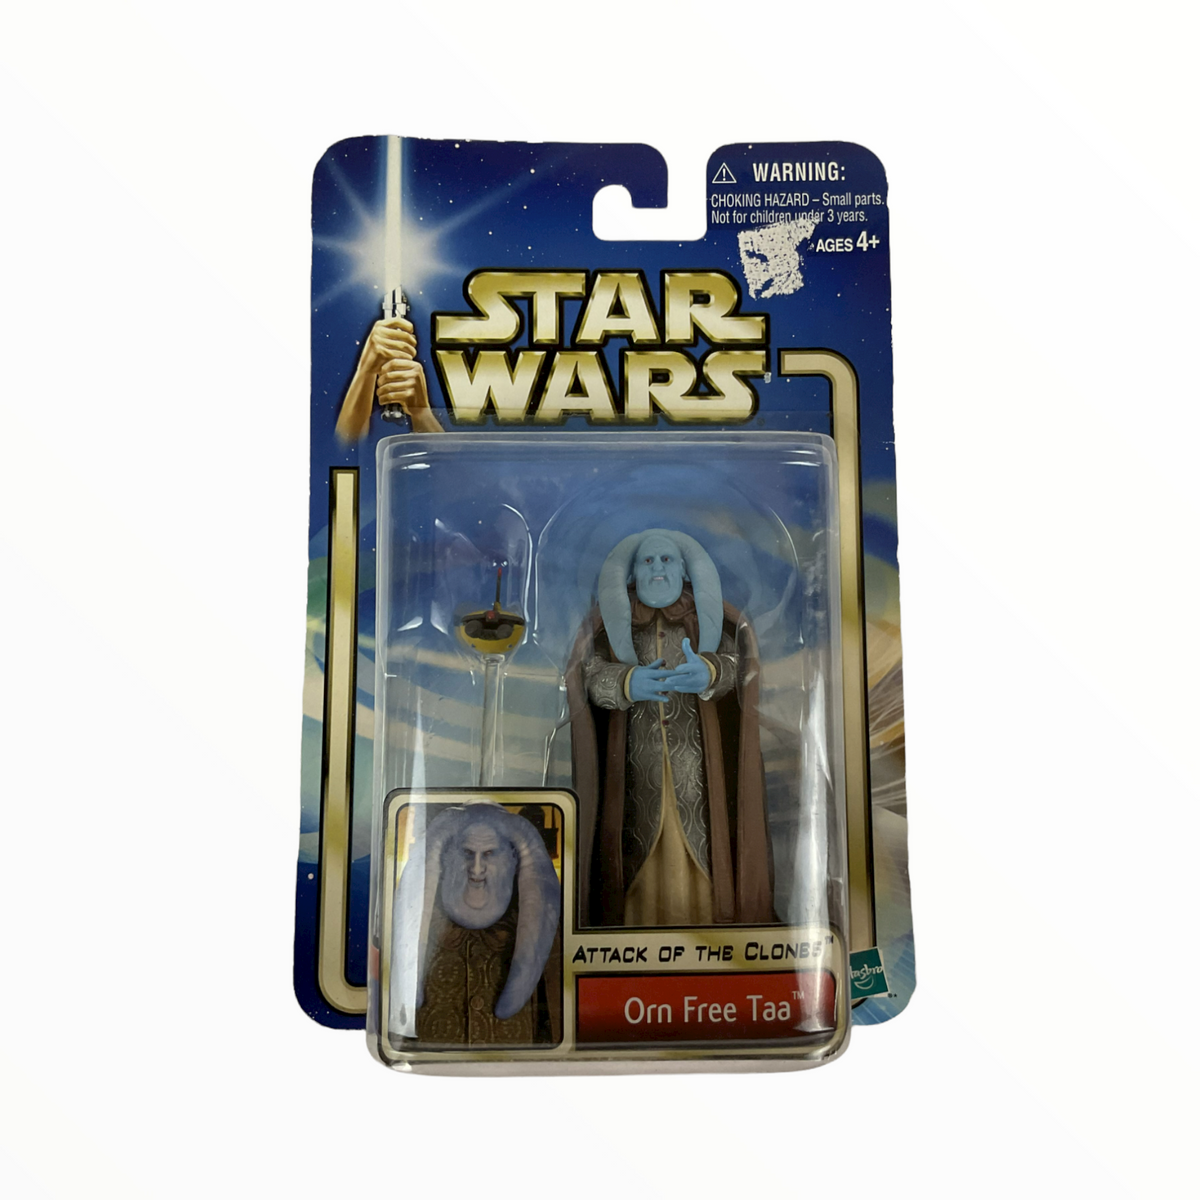 Star Wars Collection 15 Action Figures Orn Free Taa